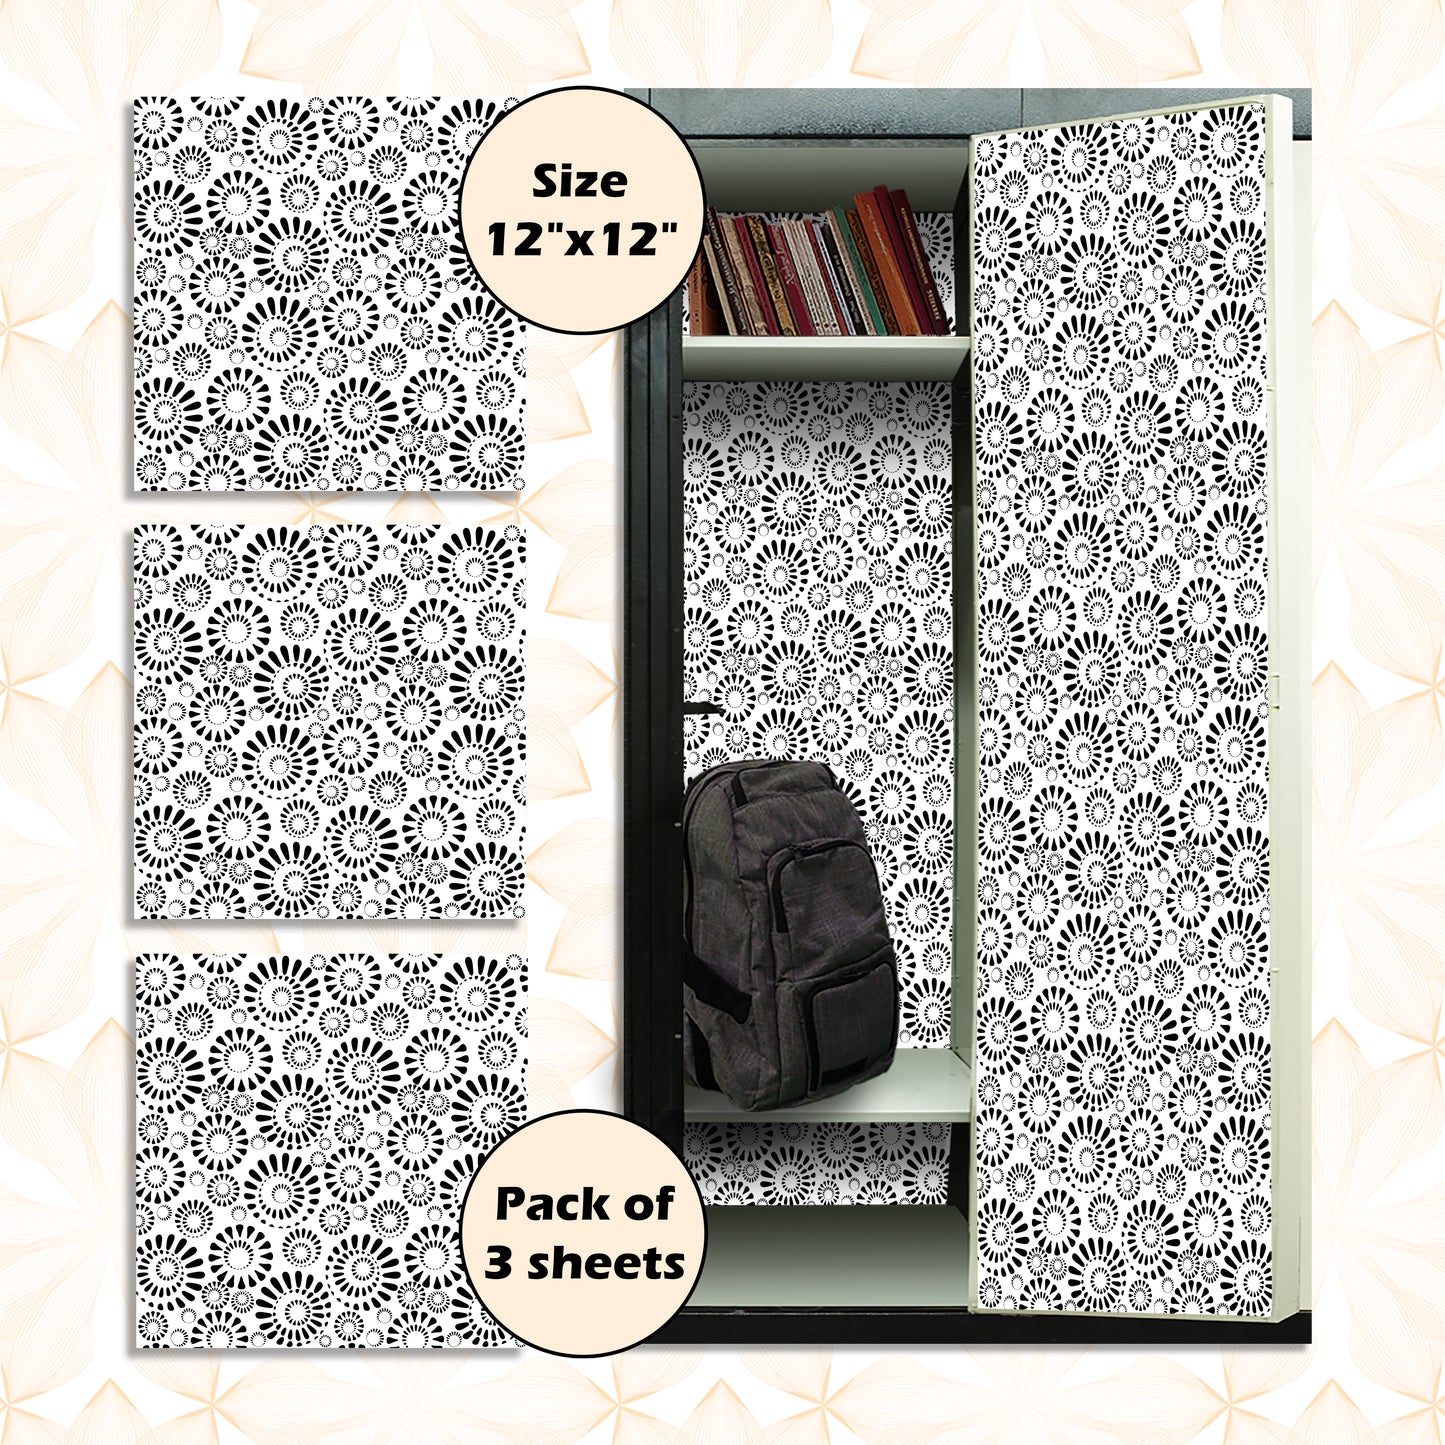 Deluxe School Locker Magnetic Wallpaper (Full sheet Magnetic) - Full Cover Standard Half Lockers - Trimmable, Easy Install, Remove & Reuse - Pack of 12 Sheets - Black and White vr67)